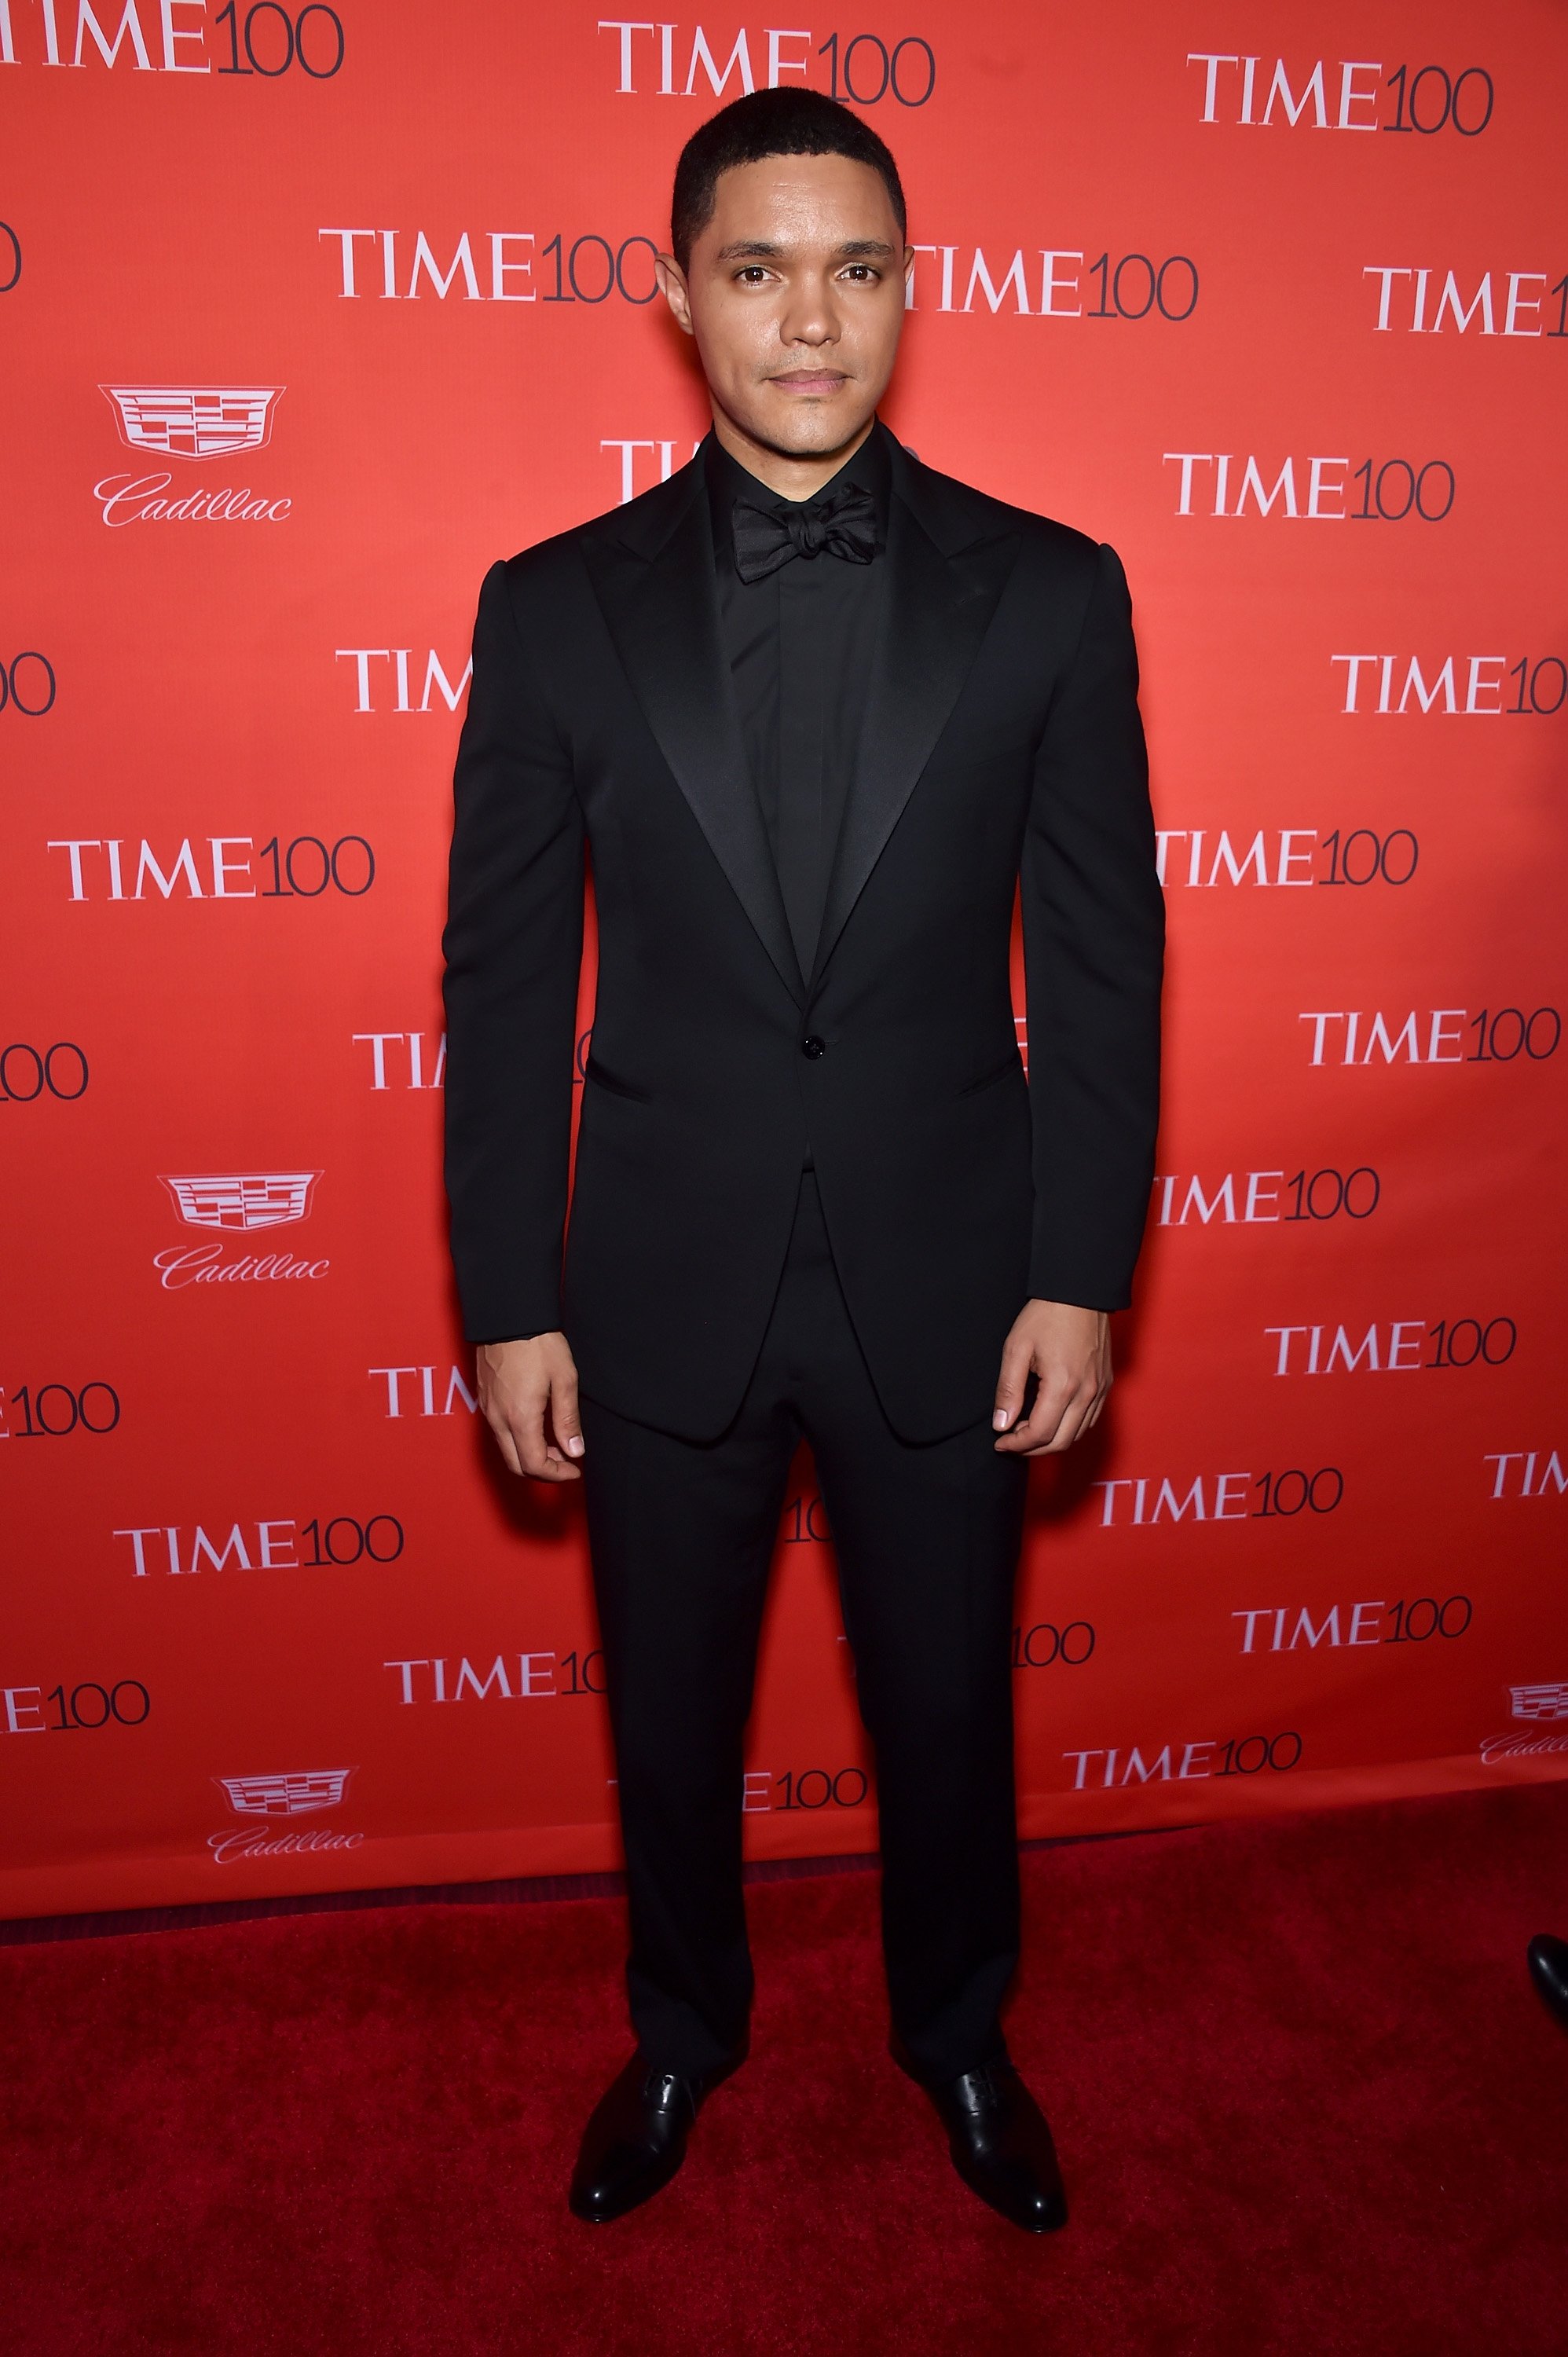 Trevor Noah at the TIME 100 gala in New York on April 26, 2016.